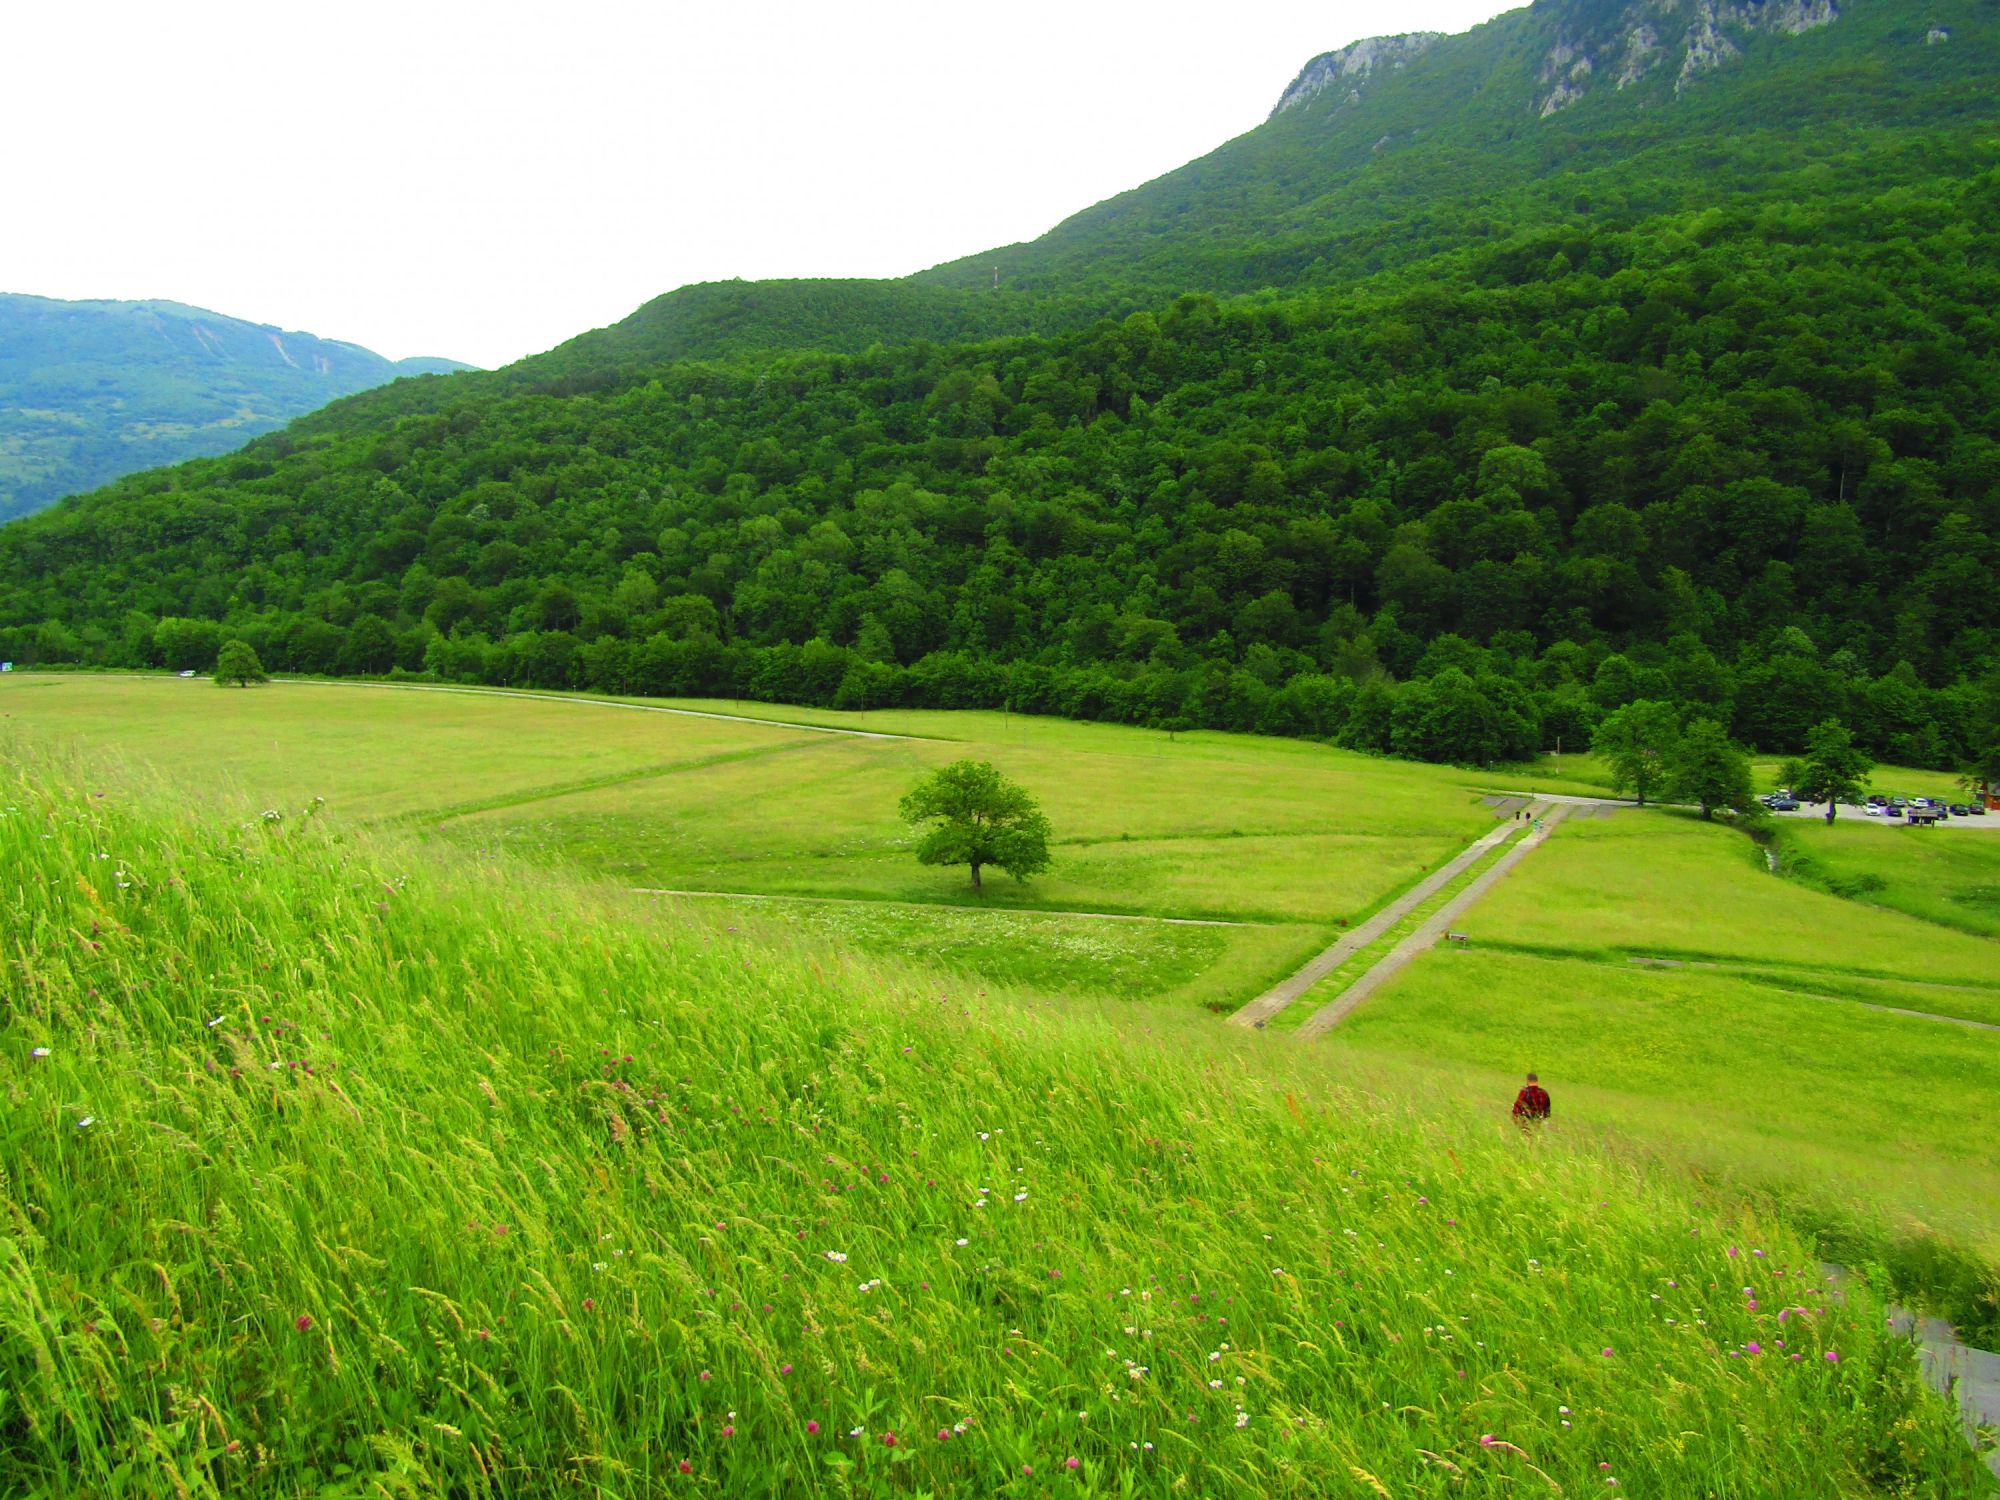 Mountains,greenery,valey